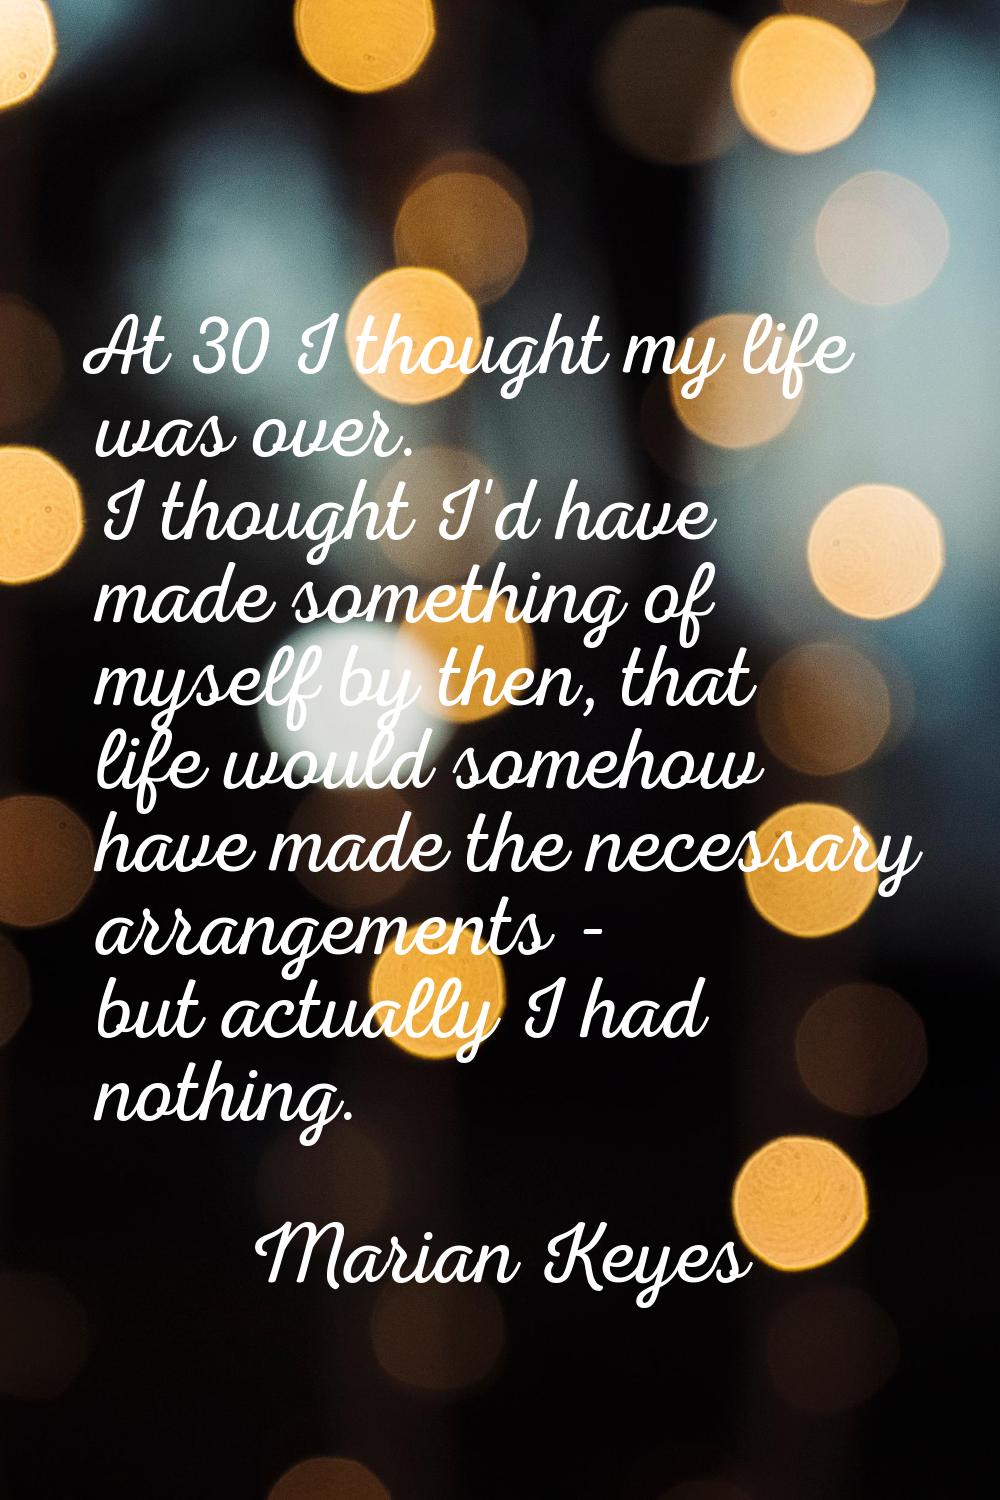 At 30 I thought my life was over. I thought I'd have made something of myself by then, that life wo